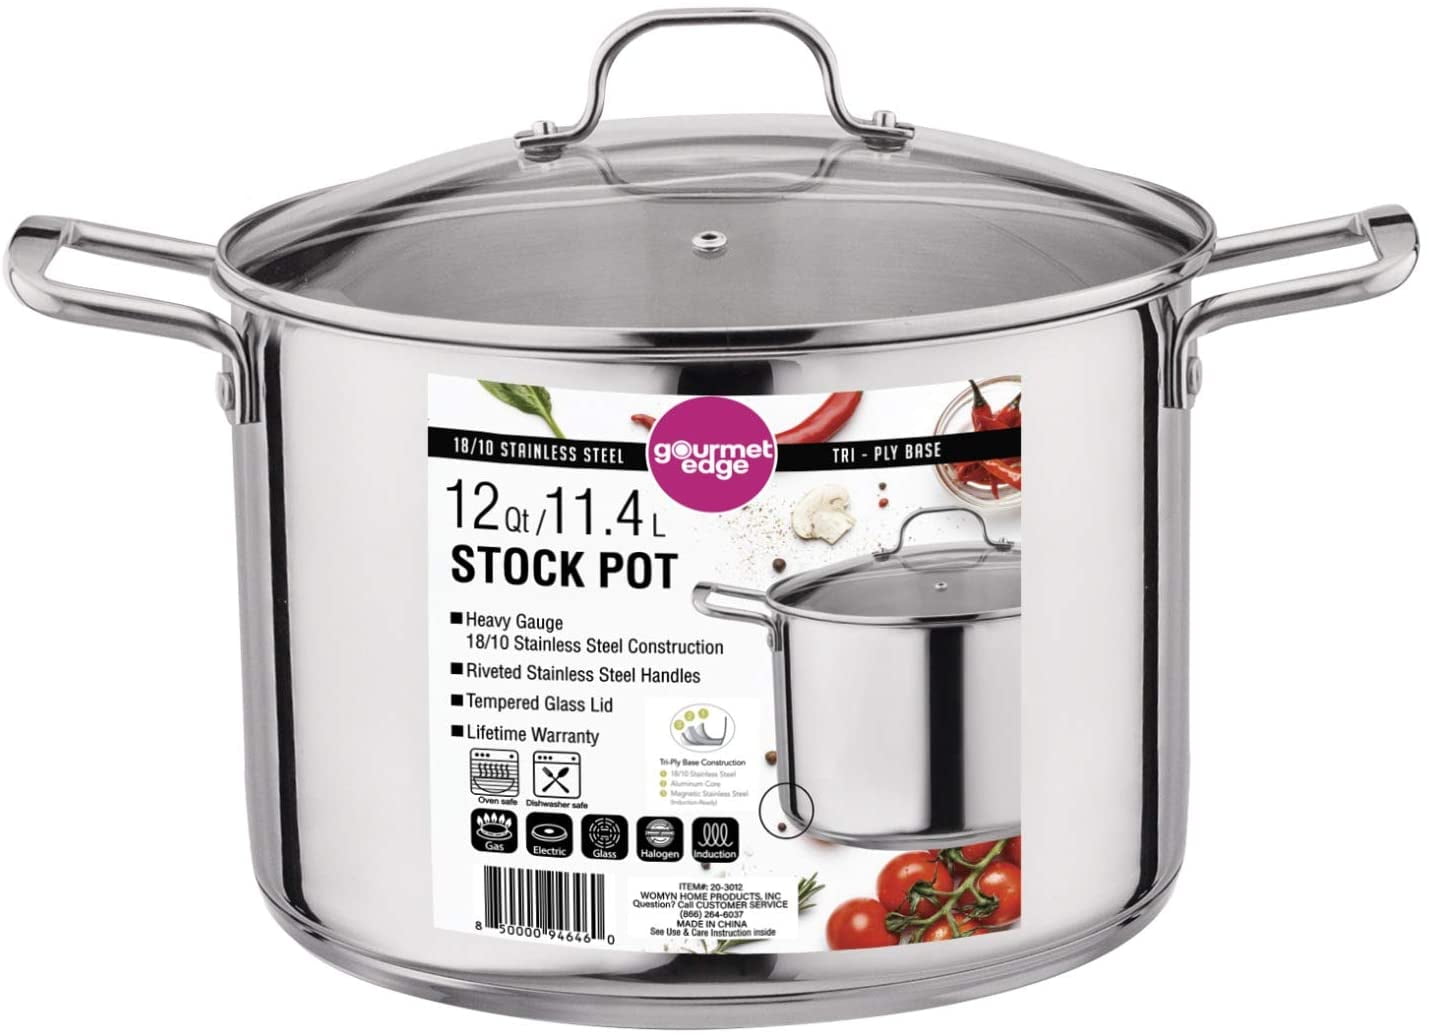 Stainless Steel Grand Gourmet #1100, Stock Pot with Faucet, 105.62